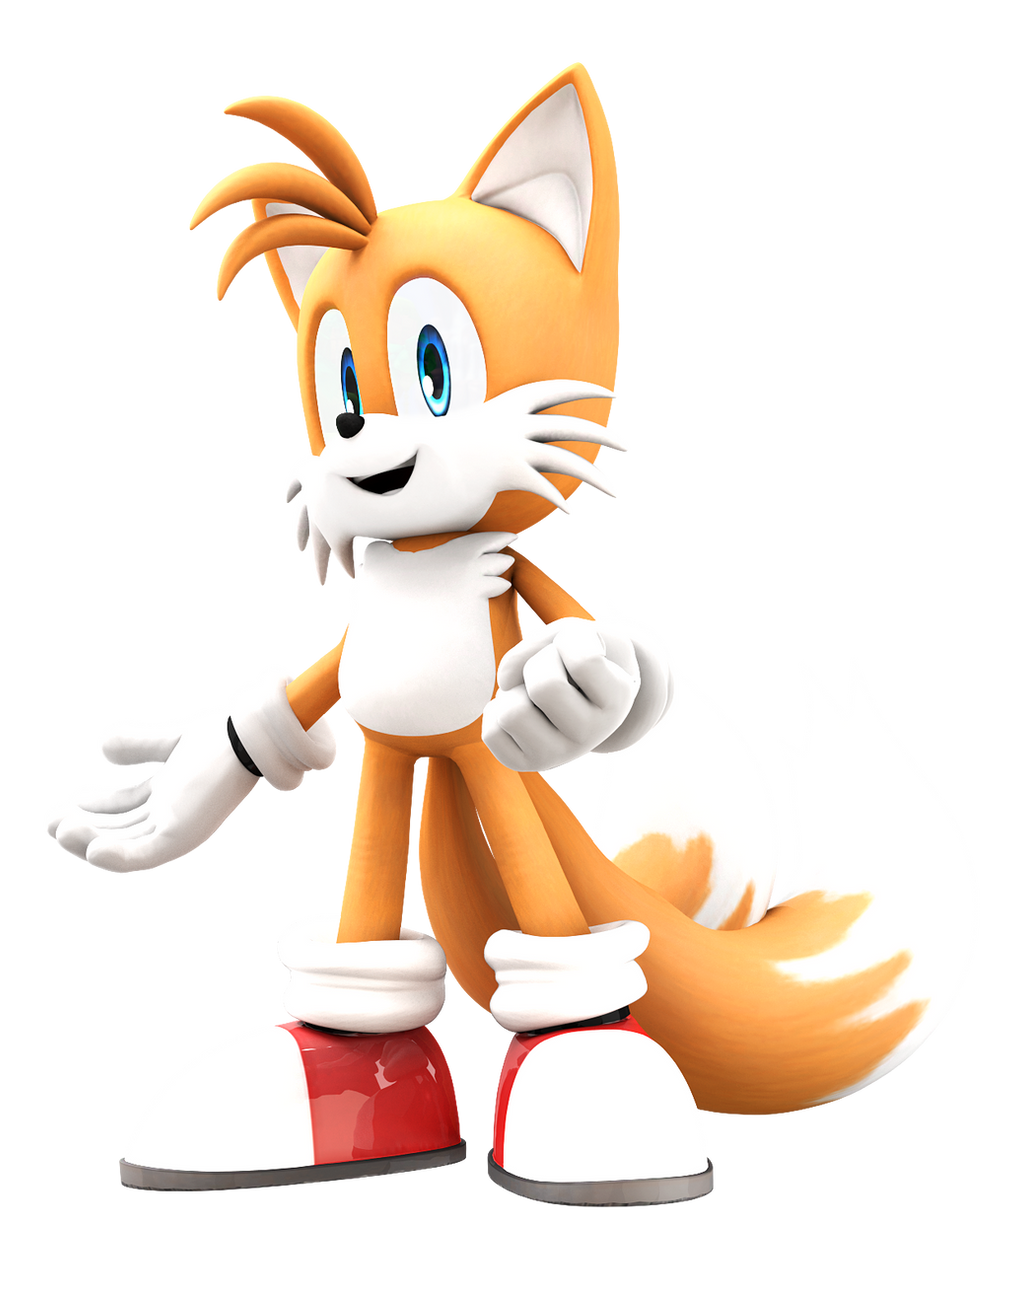 Tails Flying (Recreated Pose) Upgraded by FinnAkira on @DeviantArt